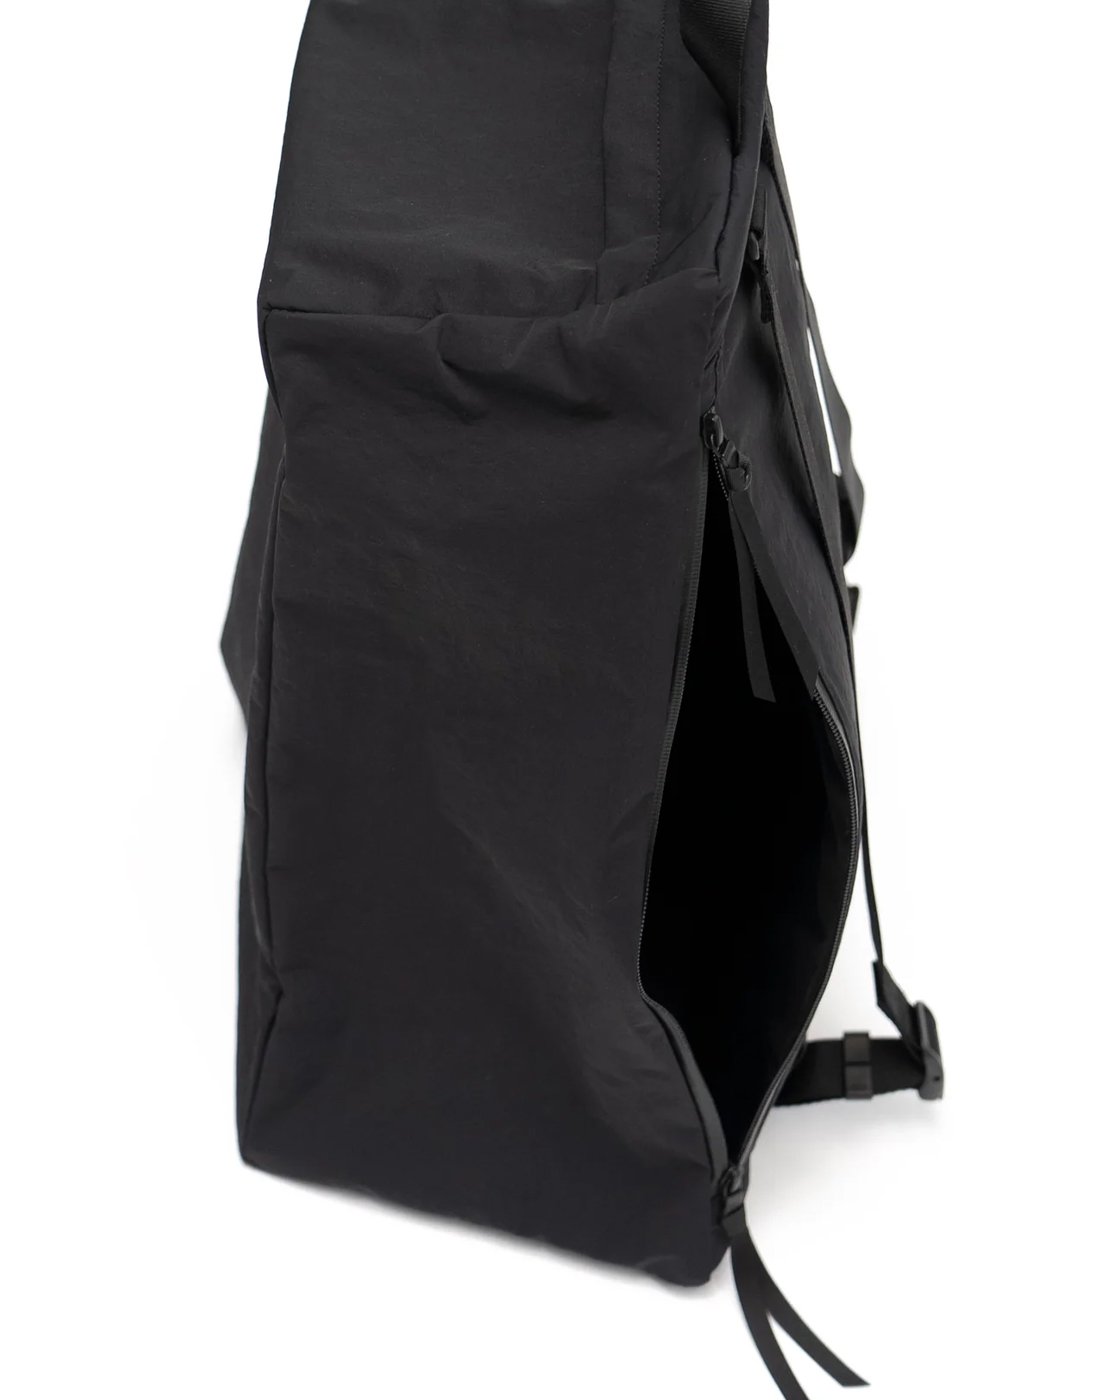 Graphpaper * Blankof for GP Back Pack ”TRAPEZOID” * Black